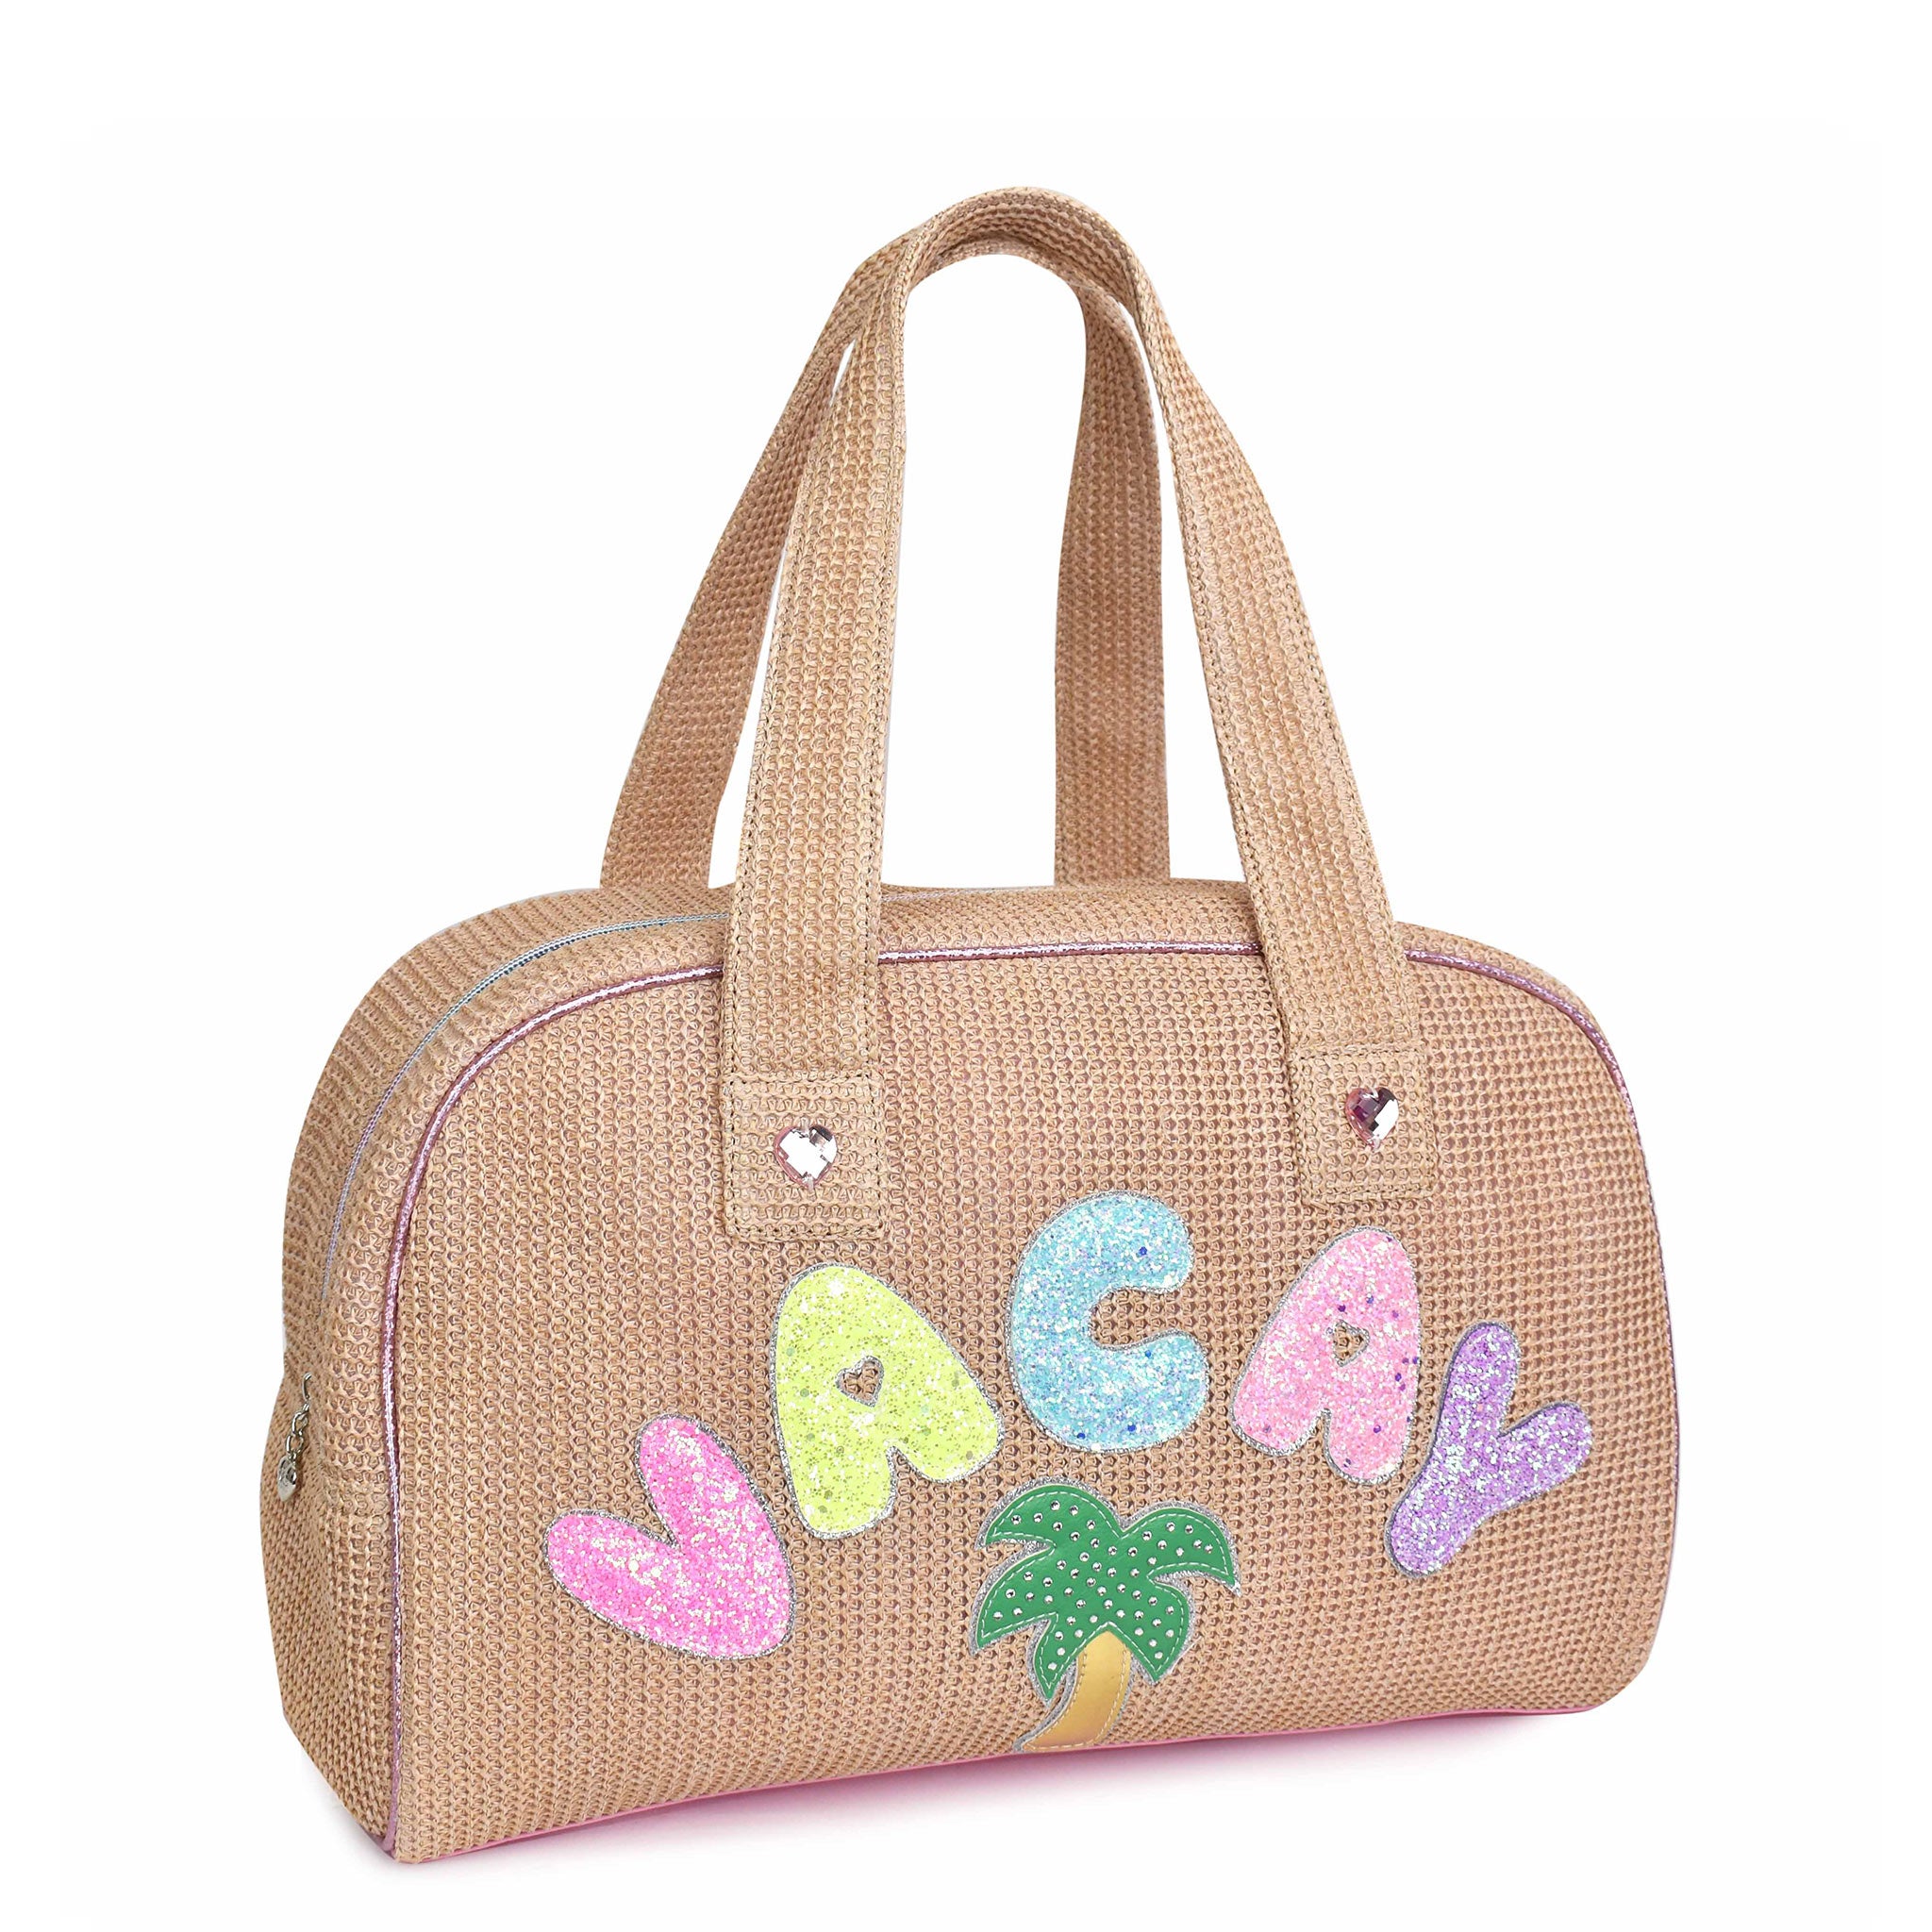 Side view of straw 'Vacay' medium duffle bag with glitter bubble-letter patches and palm tree patch